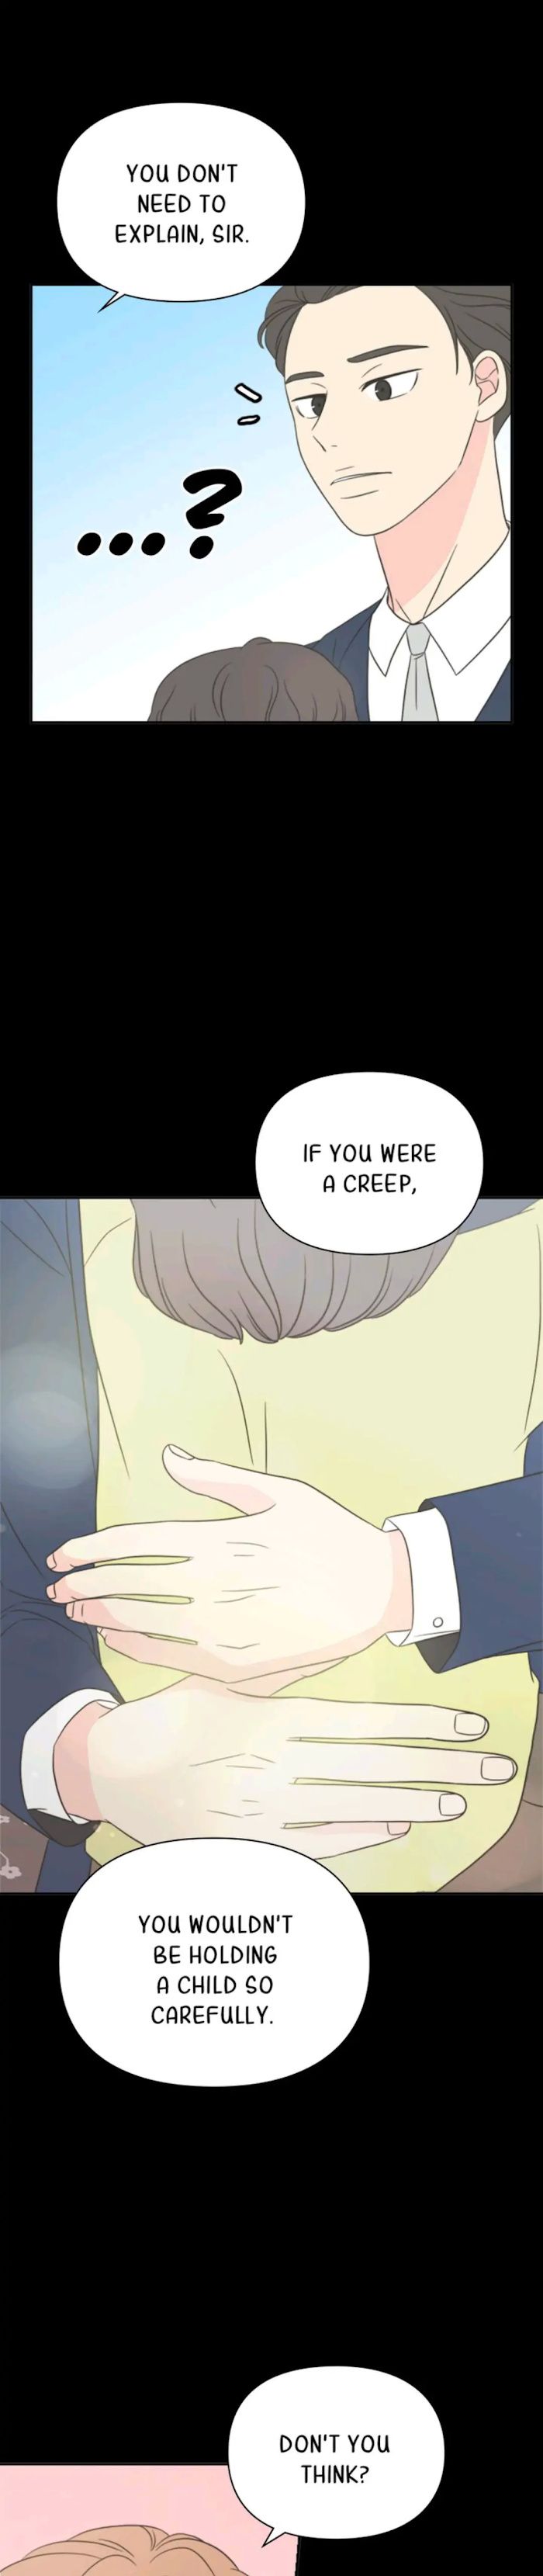 Check In to My Heart chapter 3 - Page 5